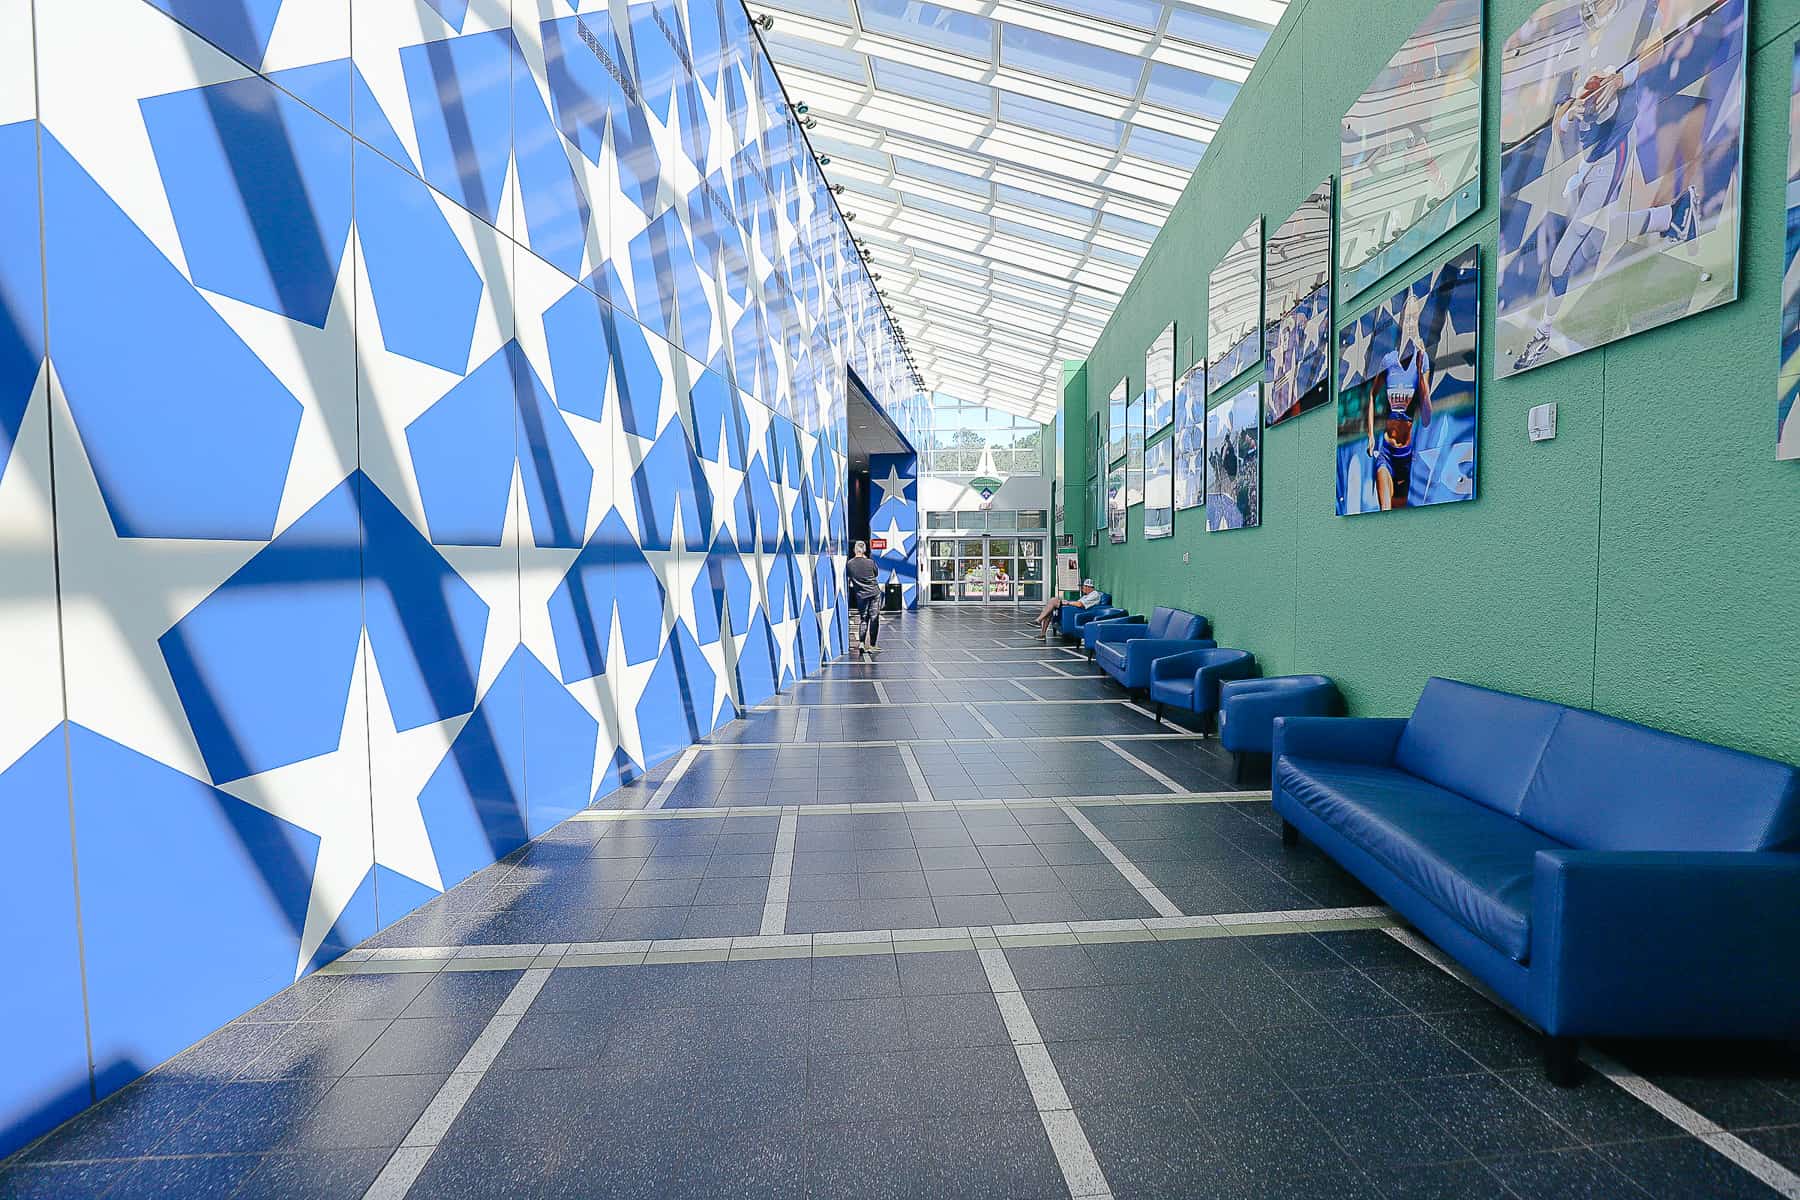 the interior blue wall with white stars 